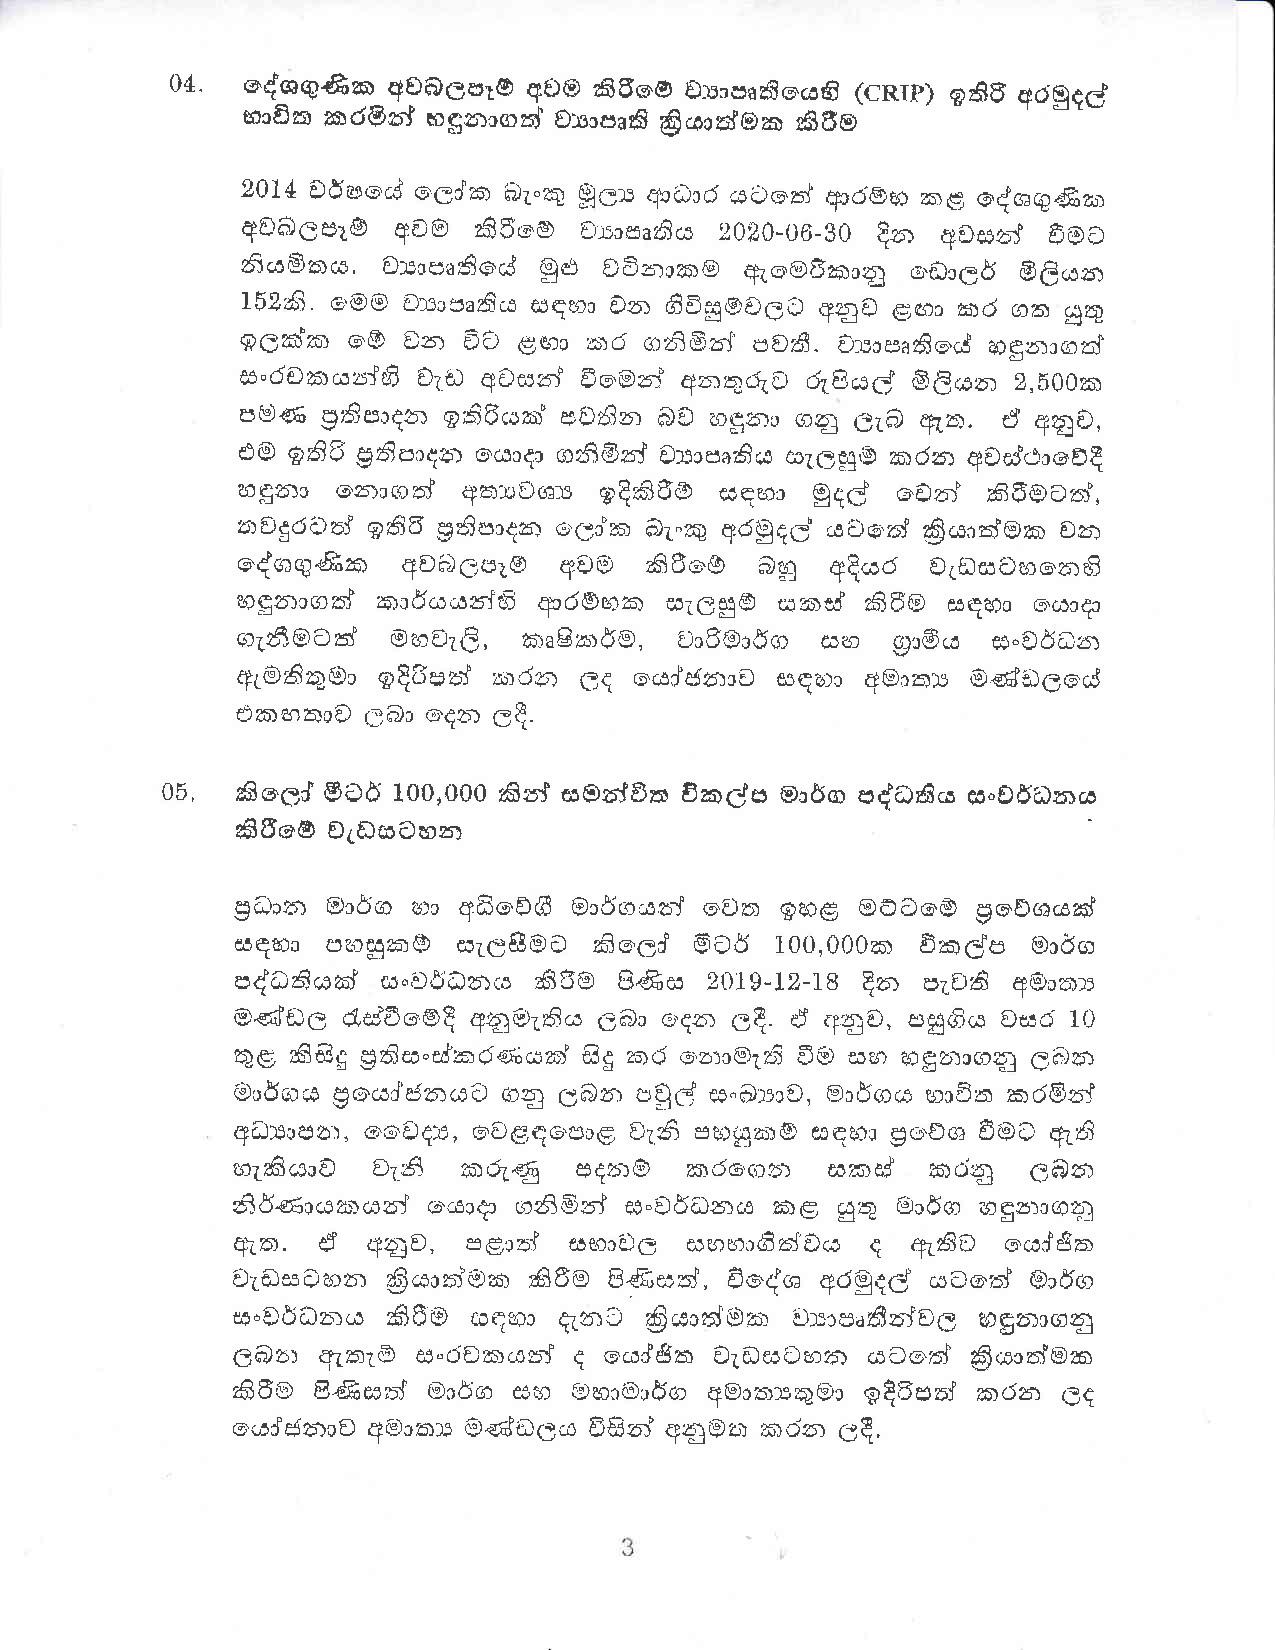 Cabinet Decision on 05.02.2020 page 003